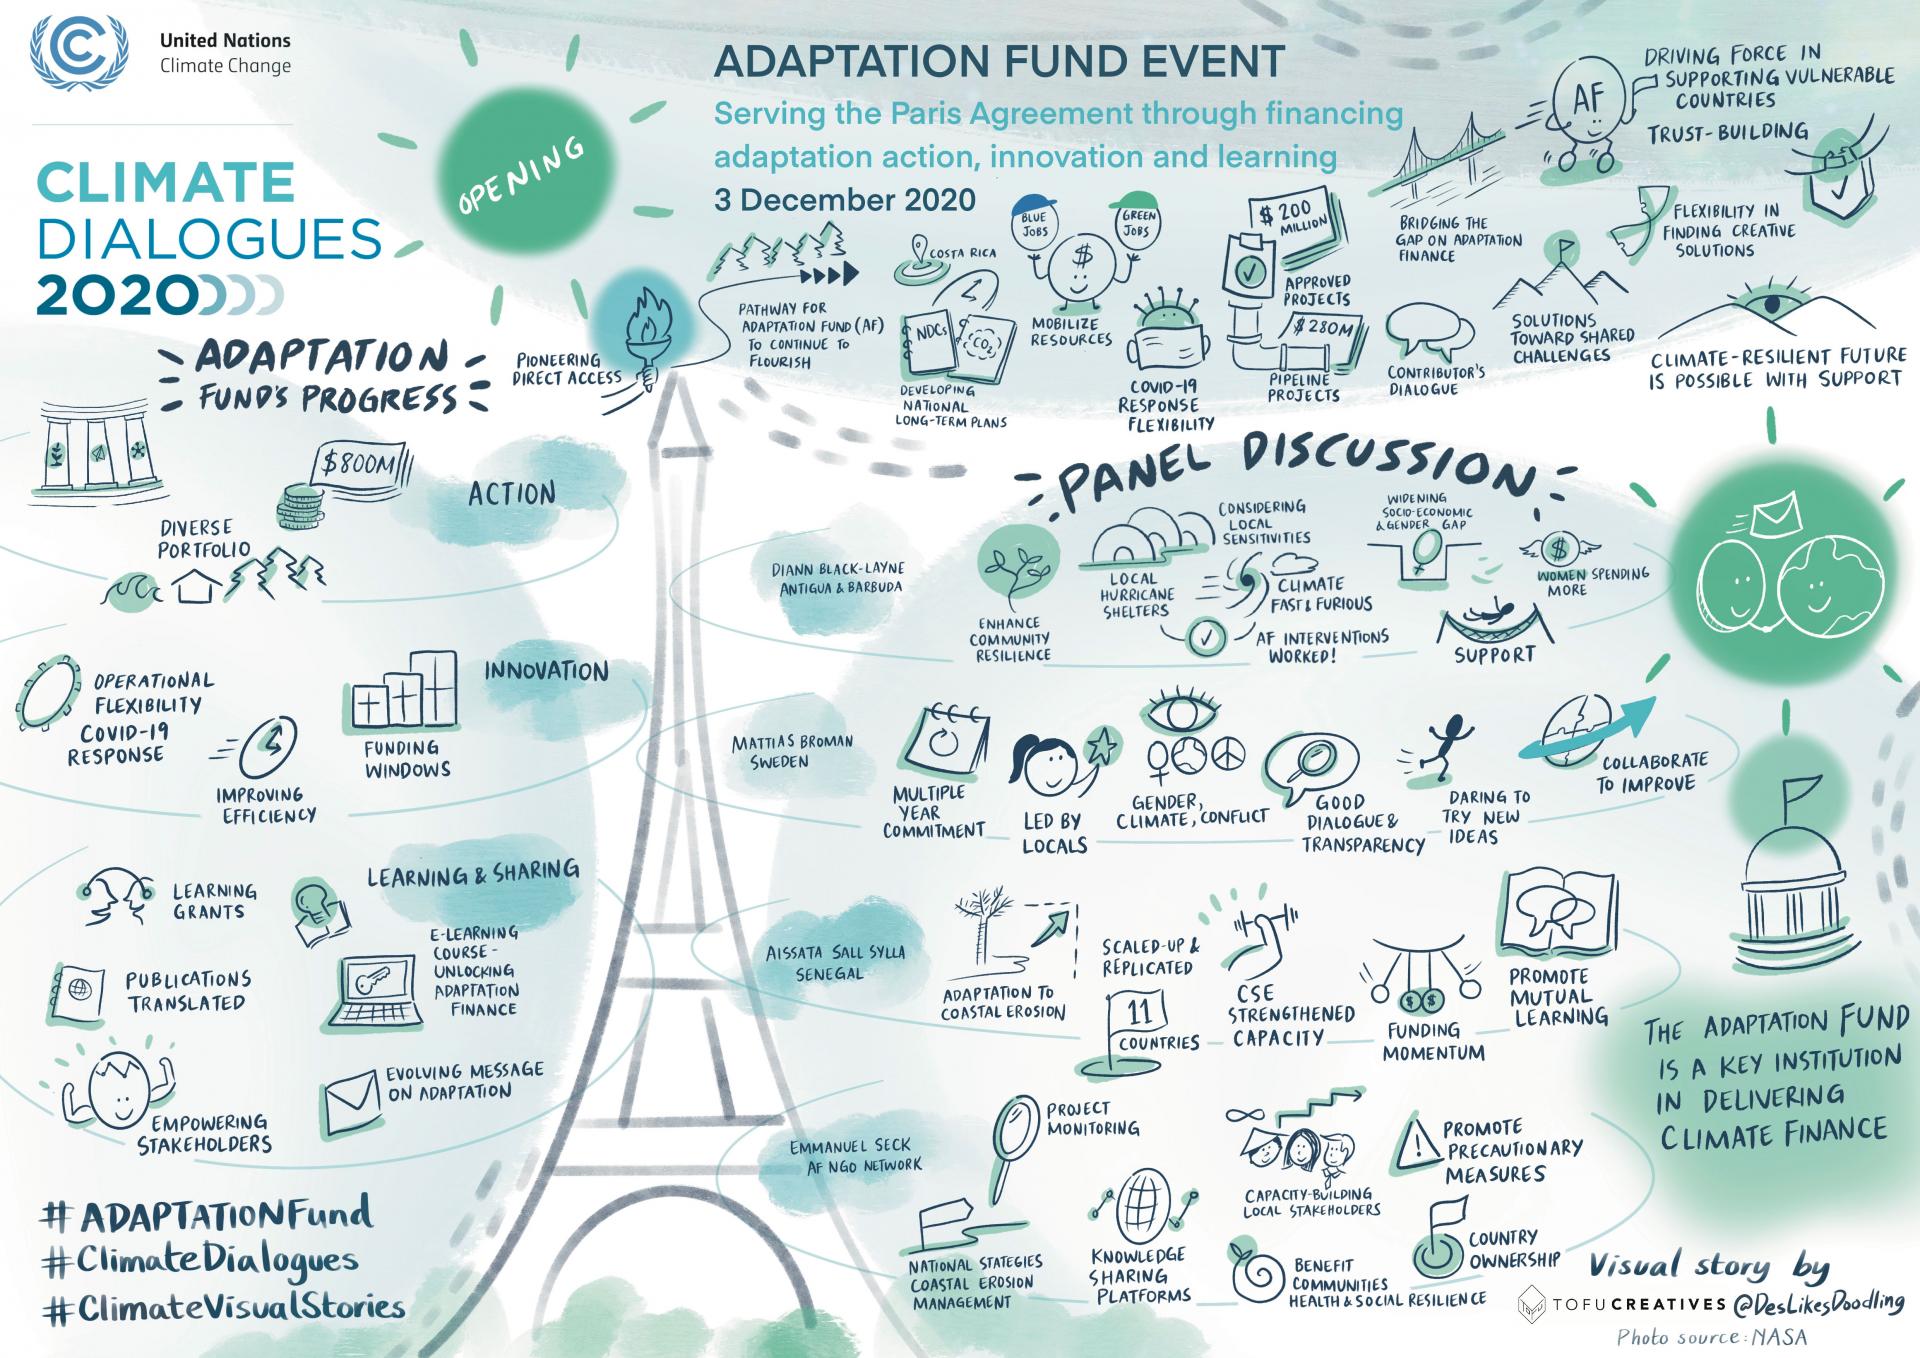 Adaptation Fund Event: Serving the Paris Agreement through financing adaptation action, innovation and learning